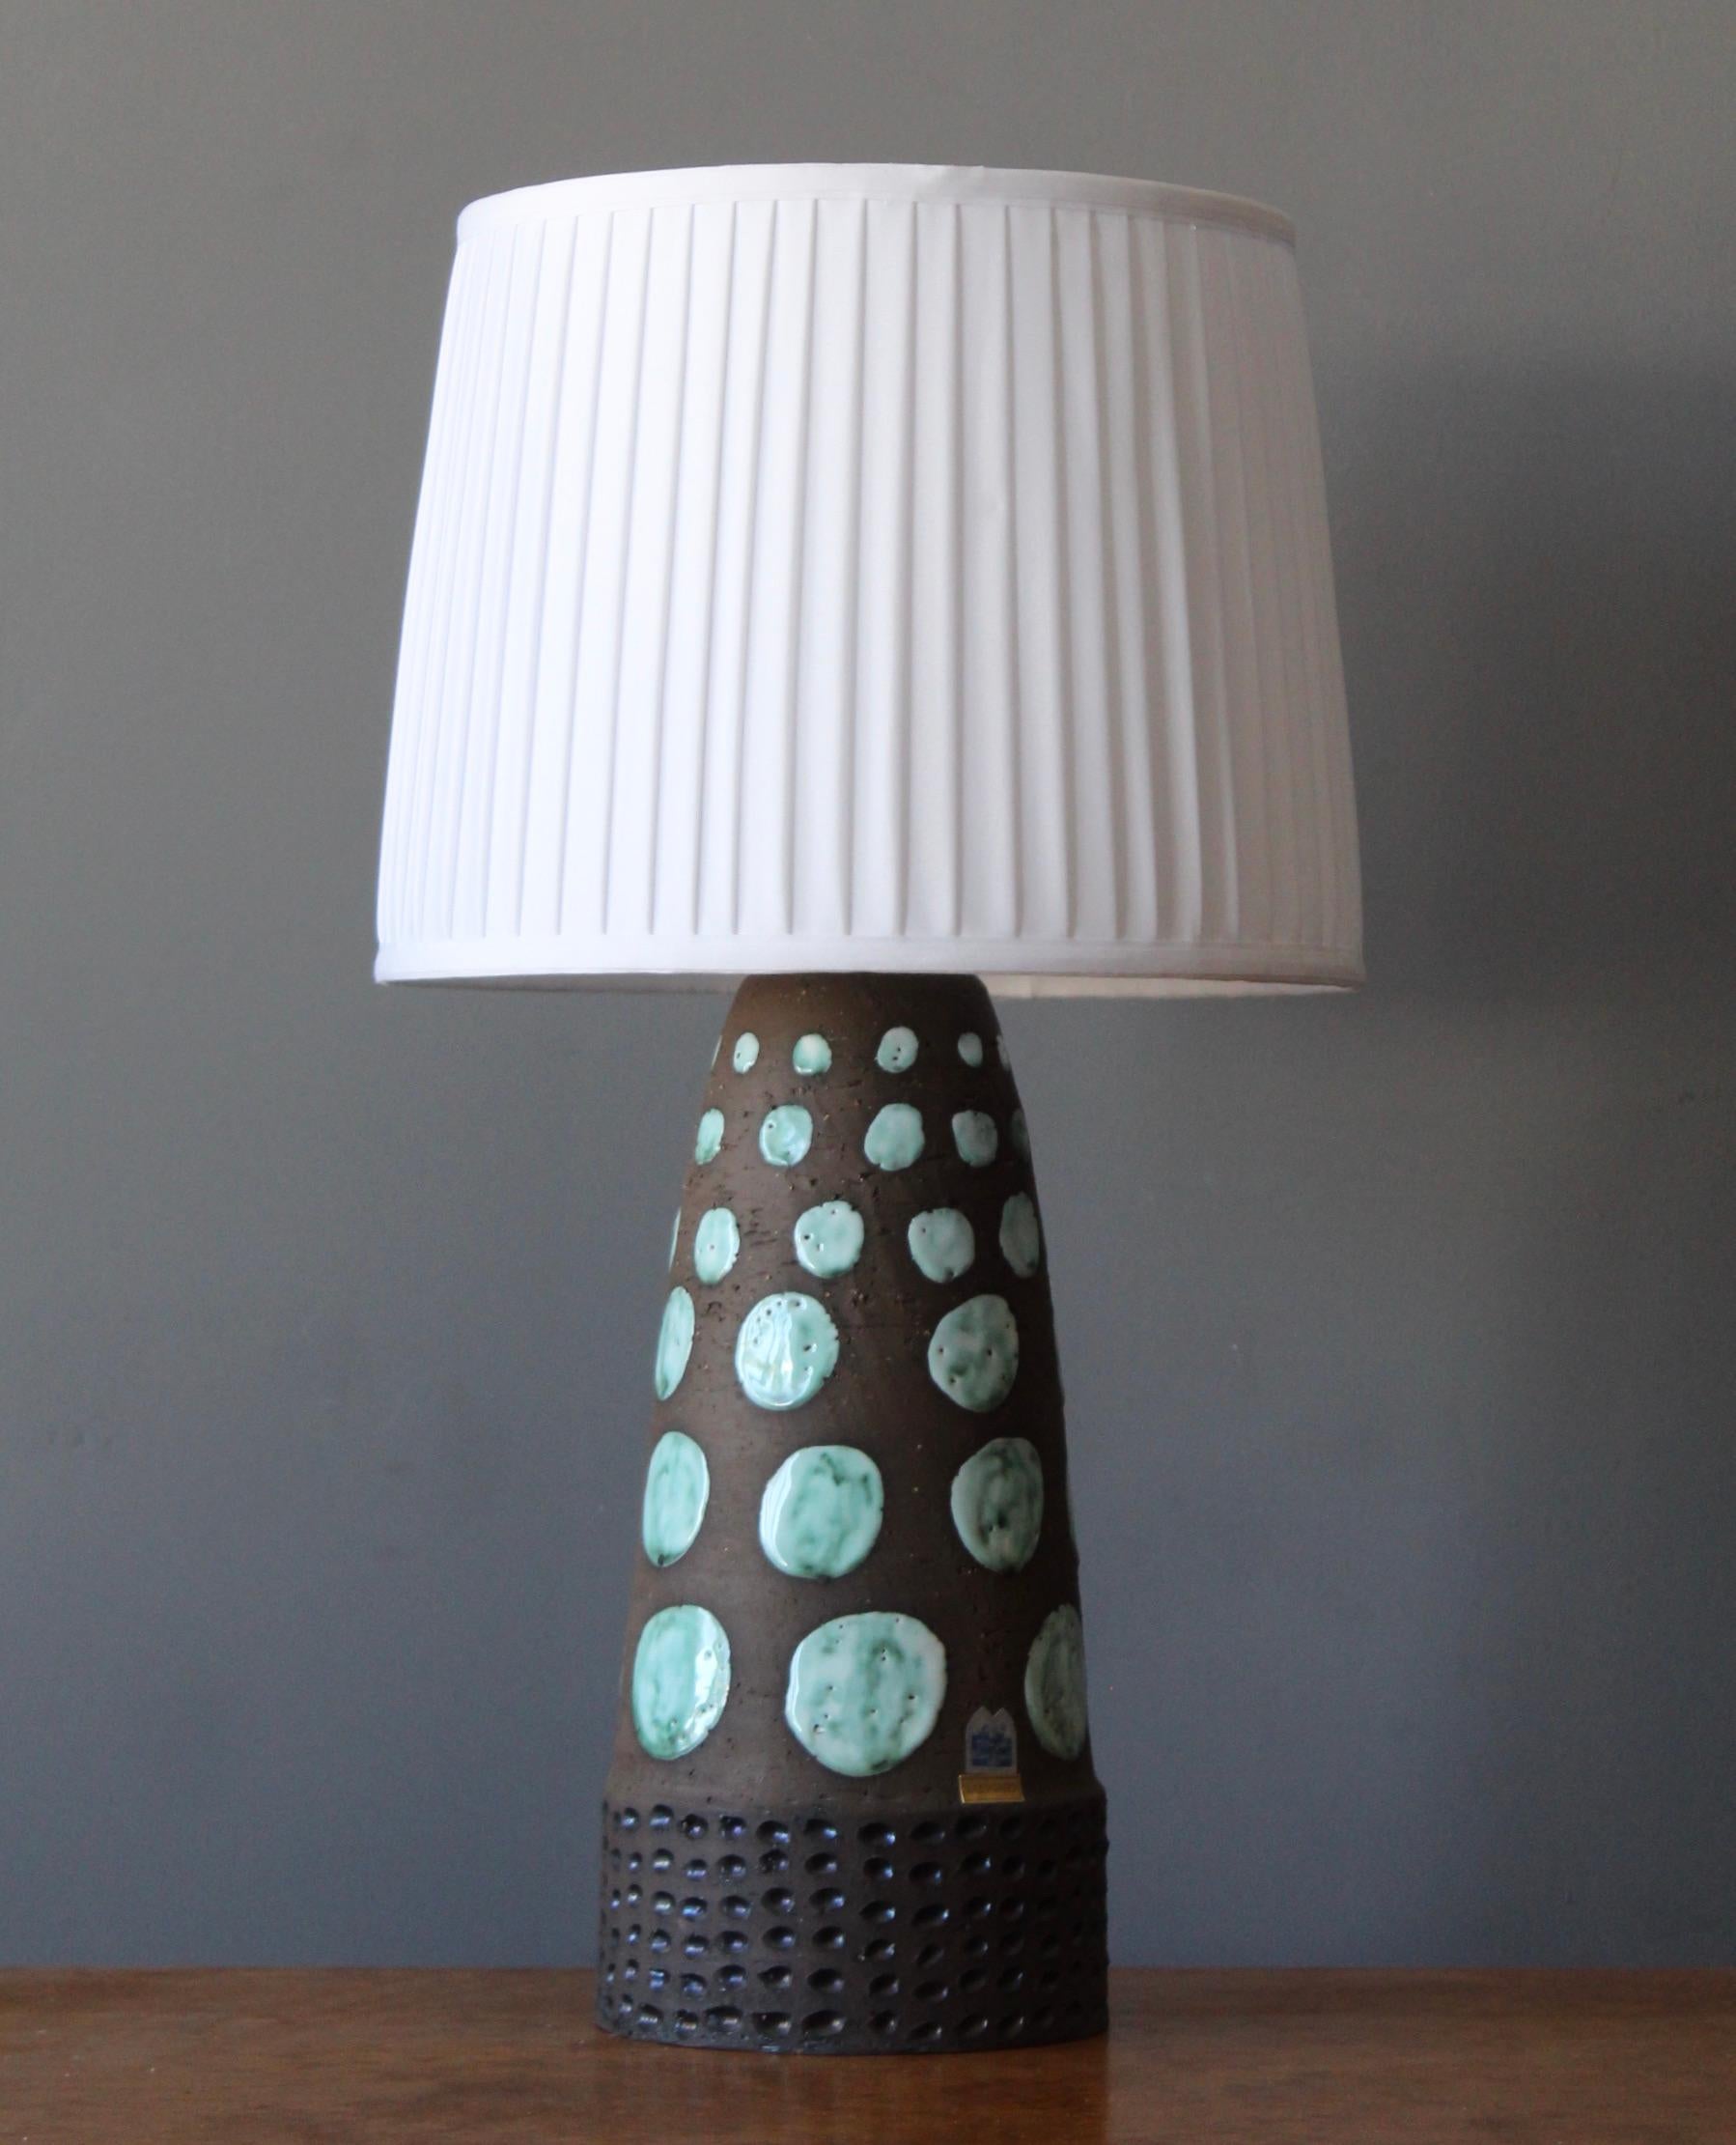 A sizable table lamp, designed and produced by Klosterkeramik, Ystad, Sweden, c. 1960s. Features semi glazed stoneware, in brown and teal / blue. With makers label. Incised details. 

Stated dimensions exclude lampshade, height includes socket.